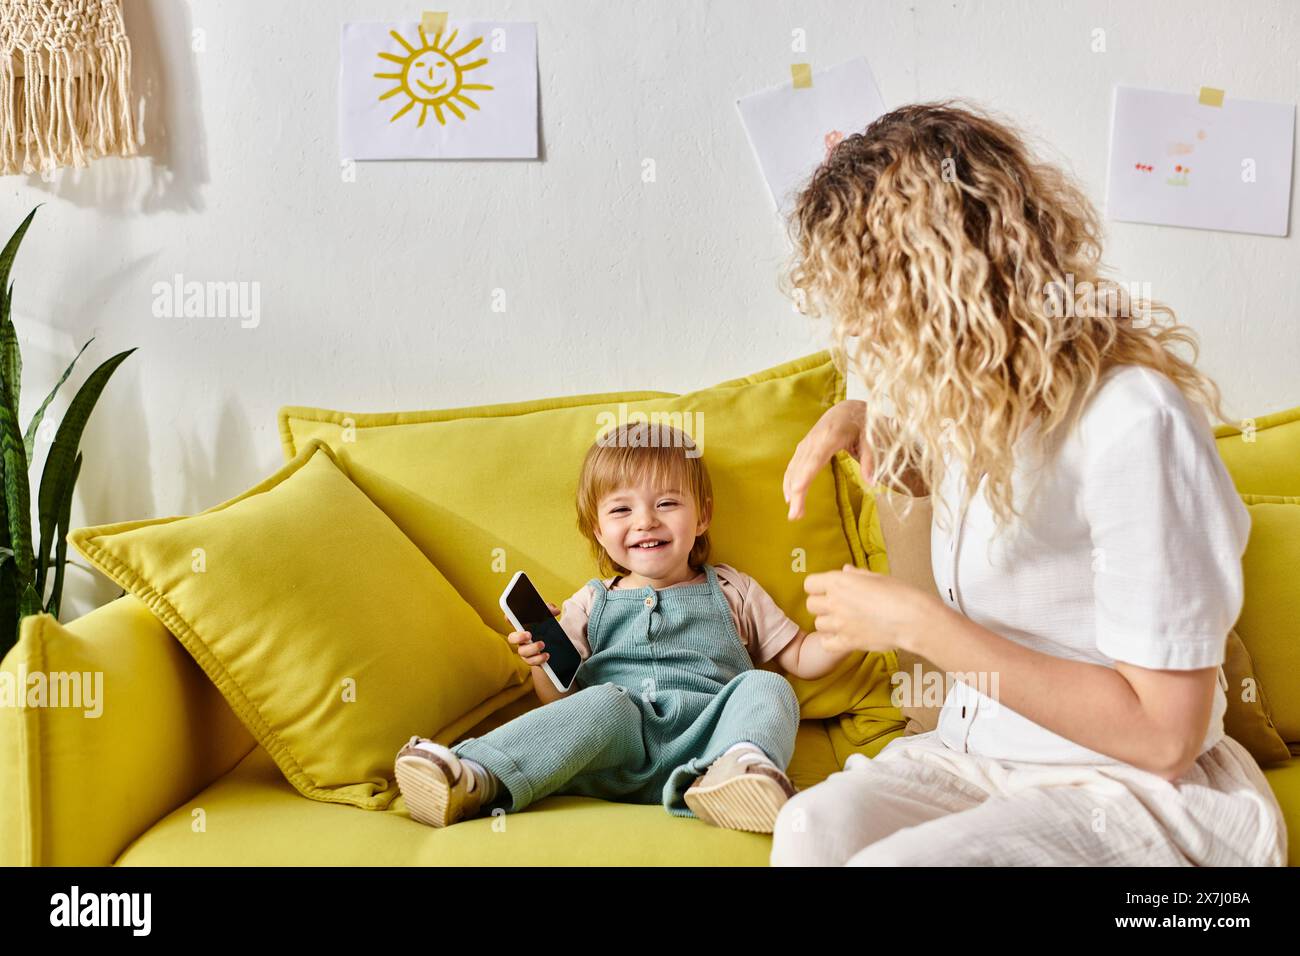 A curly-haired mother lovingly combs her toddler daughters hair while sitting on a cozy yellow couch at home. Stock Photo